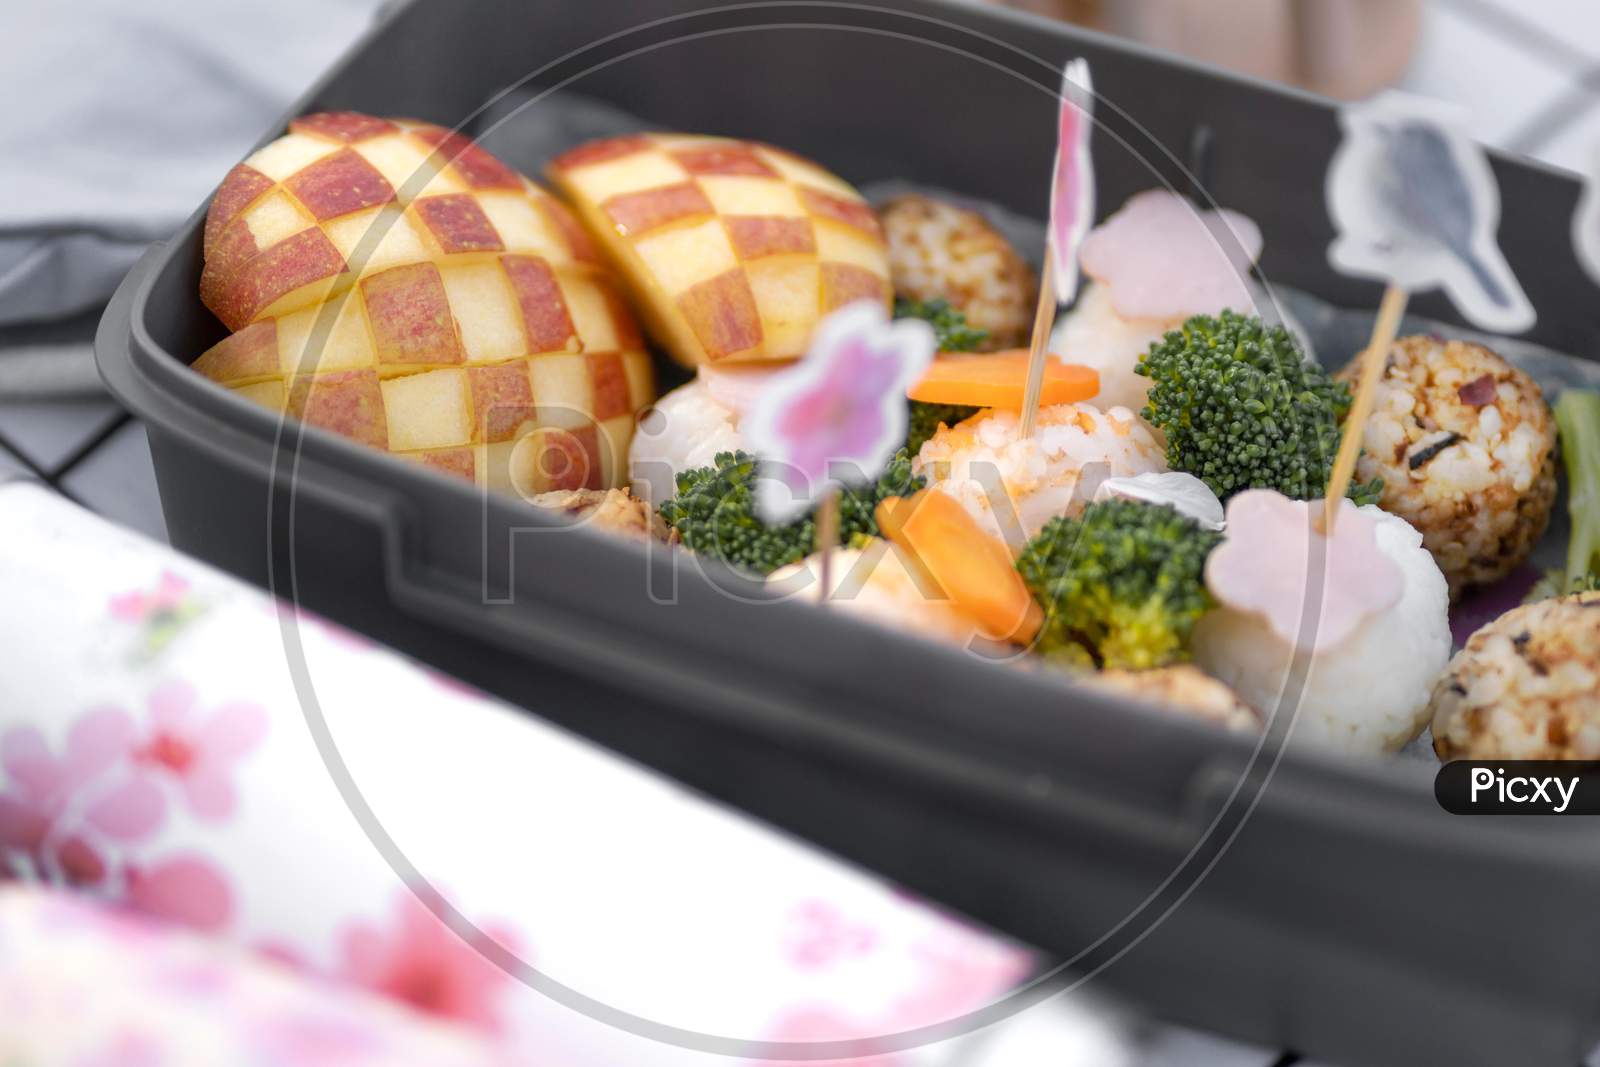 grilled salmon steak with vegetables, Delicious picnic with cherry tree flowers